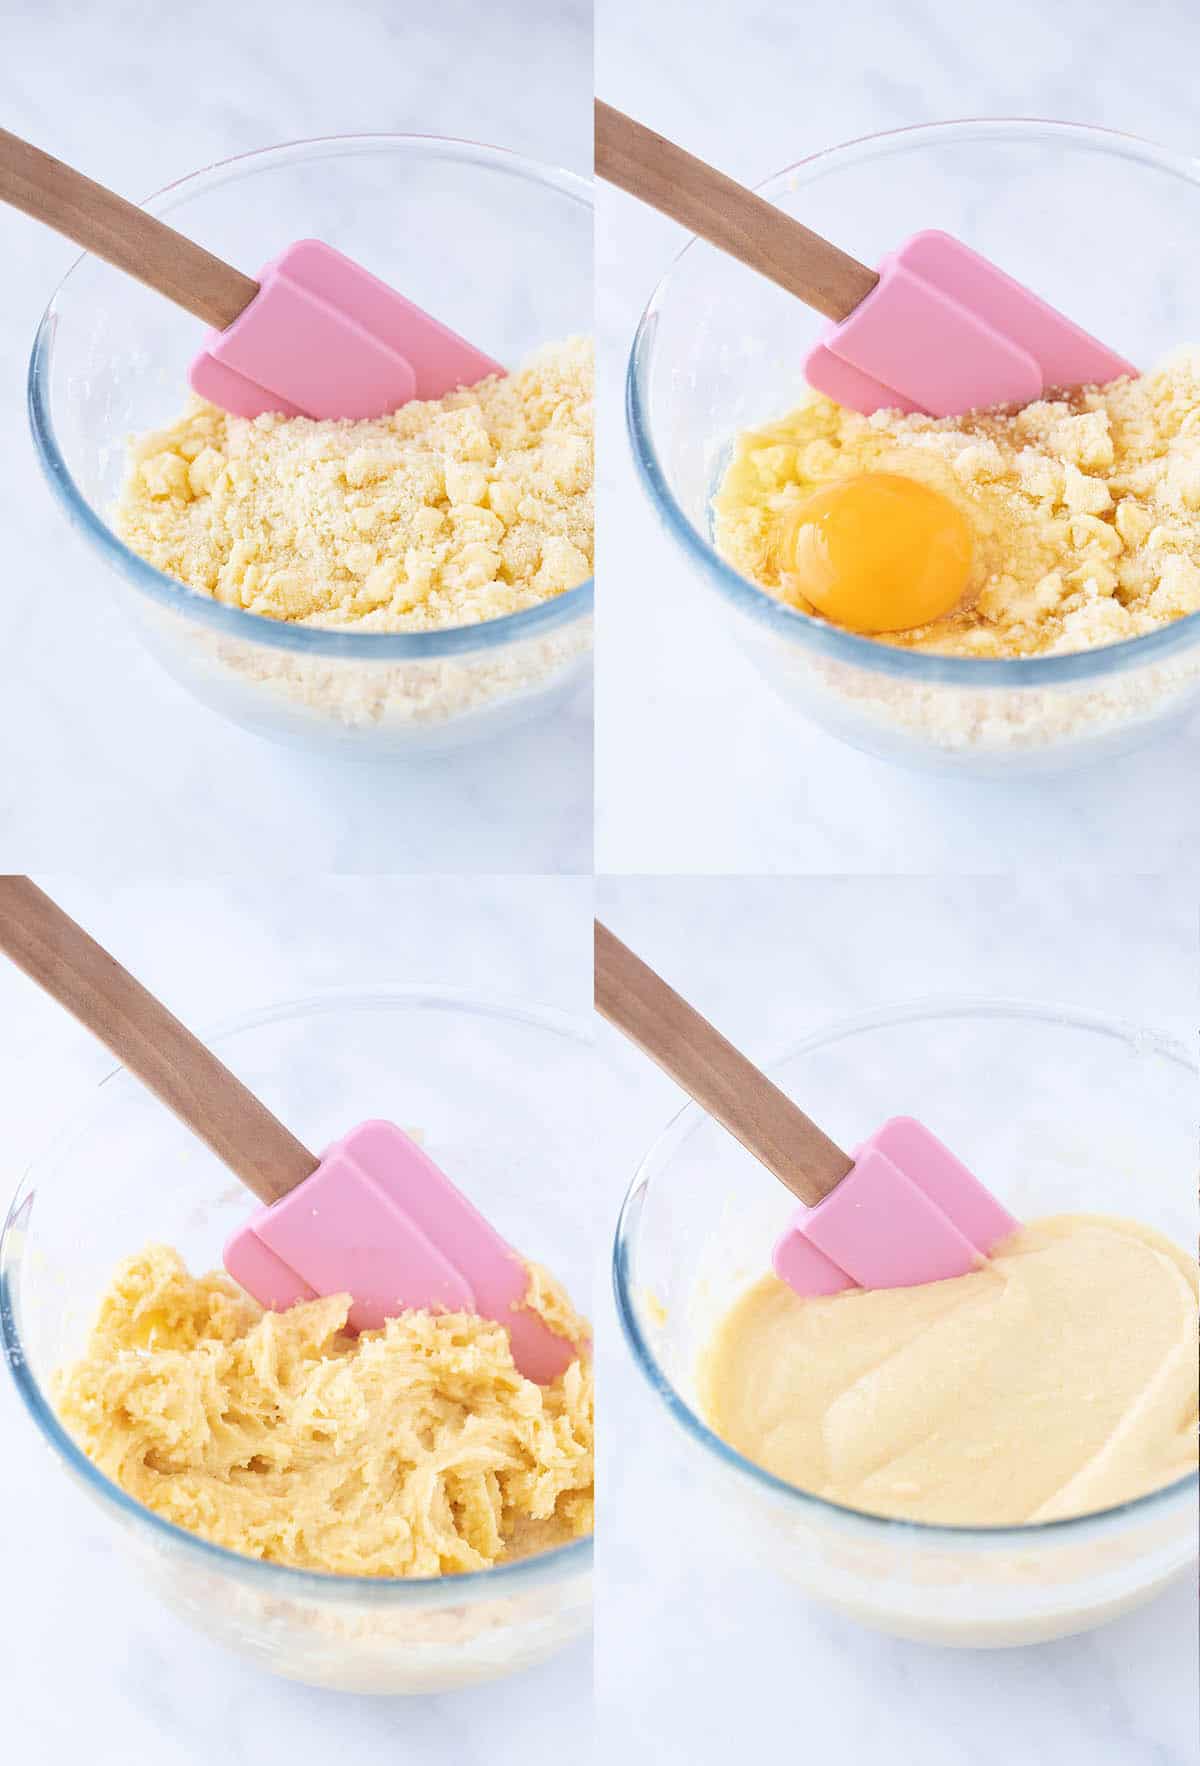 A photo collage showing how to make a vanilla cake from scratch using the reverse creaming method.